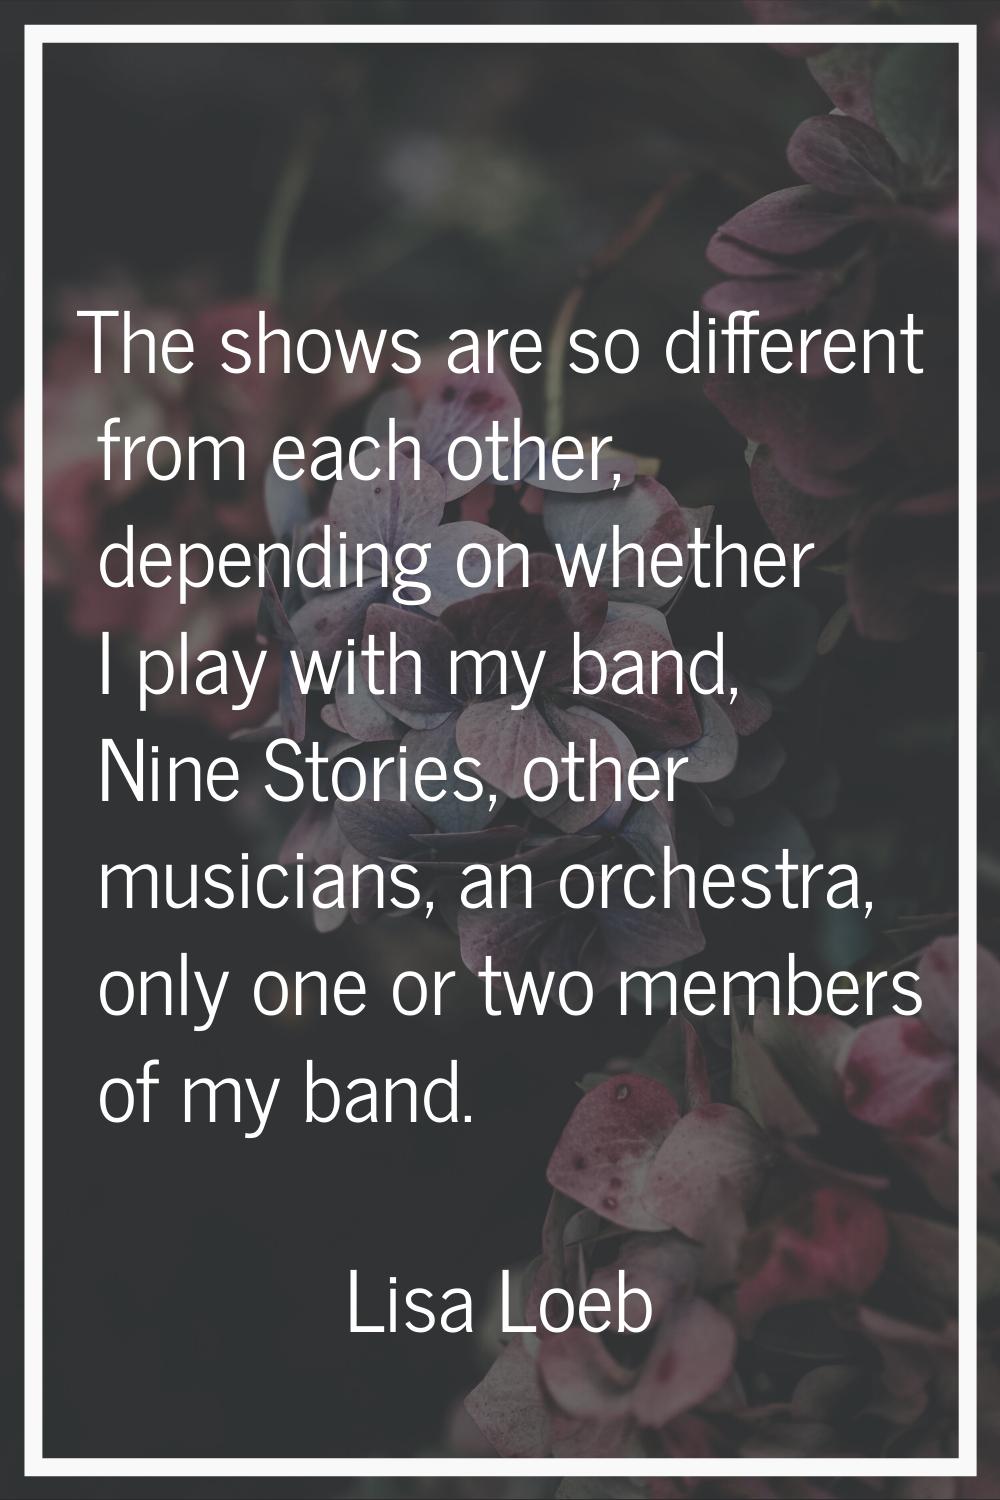 The shows are so different from each other, depending on whether I play with my band, Nine Stories,